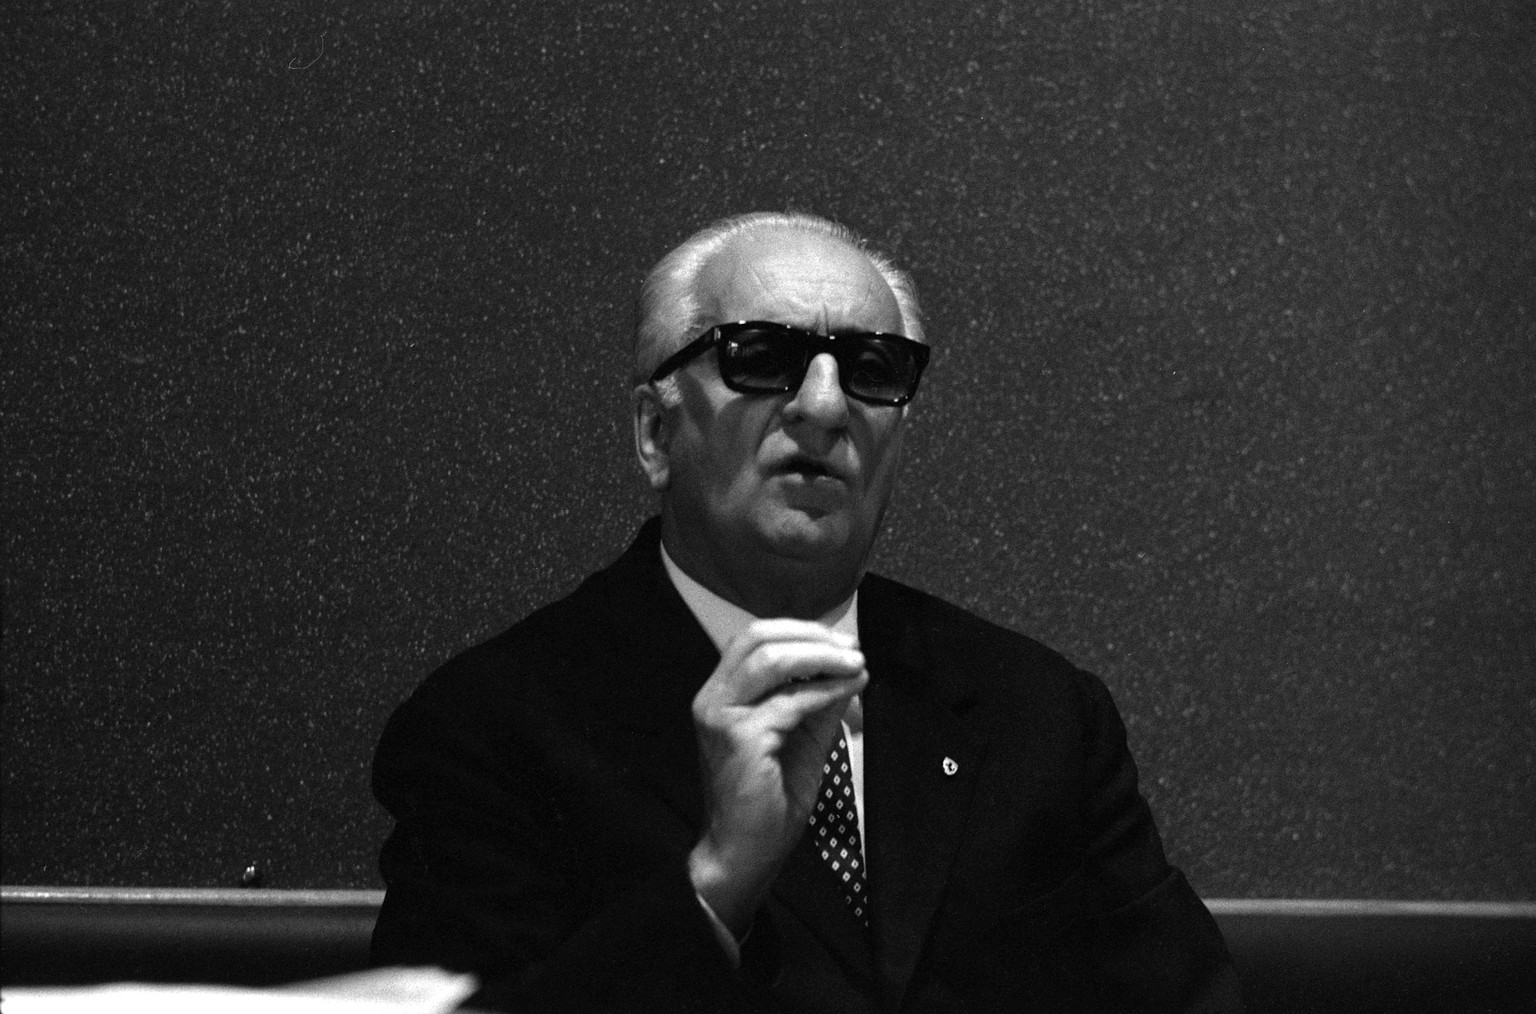 Auto Racing: Closeup portrait of Ferrari founder Enzo Ferrari in his factory office.
Maranello, Italy 7/20/1964
CREDIT: Tony Triolo (Photo by Tony Triolo /Sports Illustrated/Getty Images)
(Set Number: ...